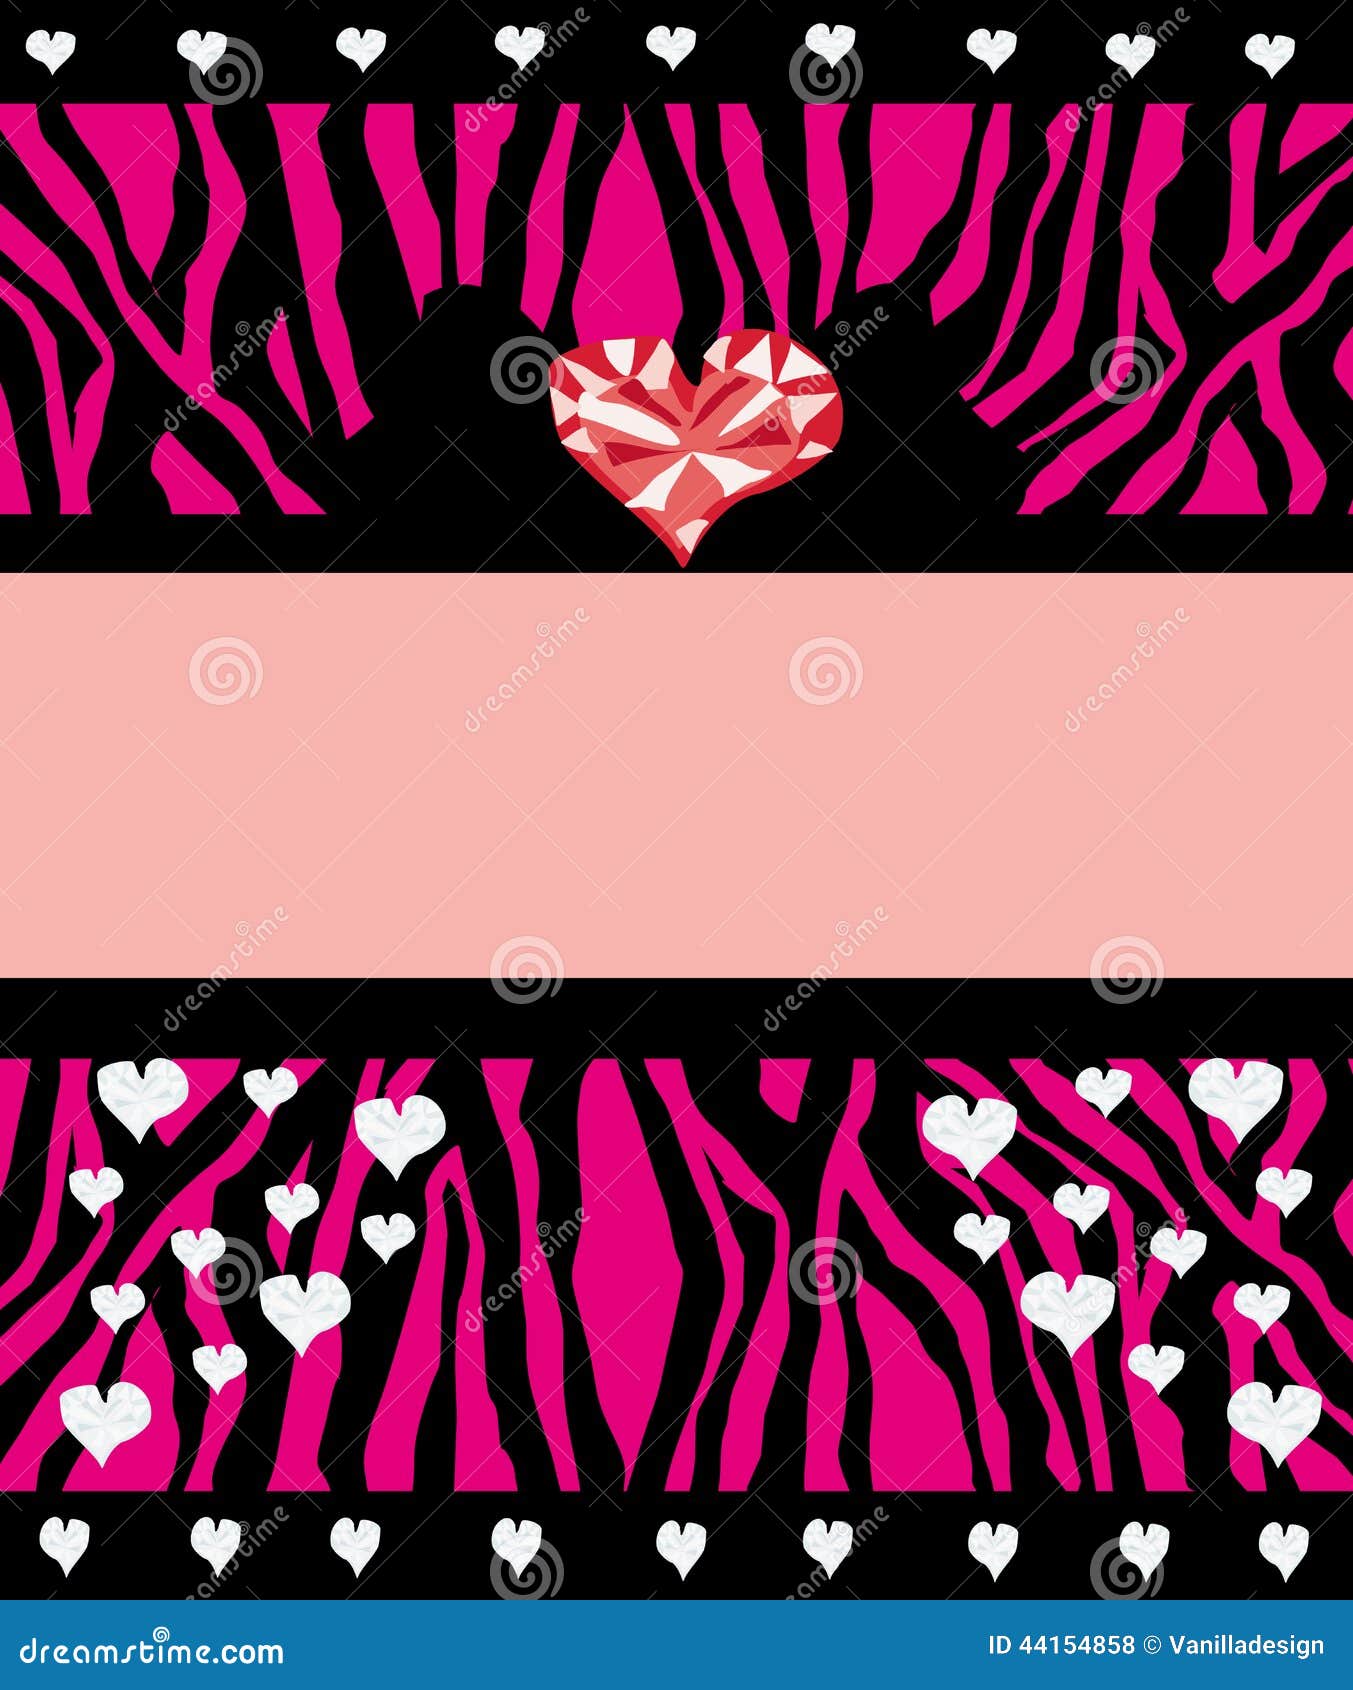 Invitation cards template with abstract Diamond hearts and zebra print, Vector illustration